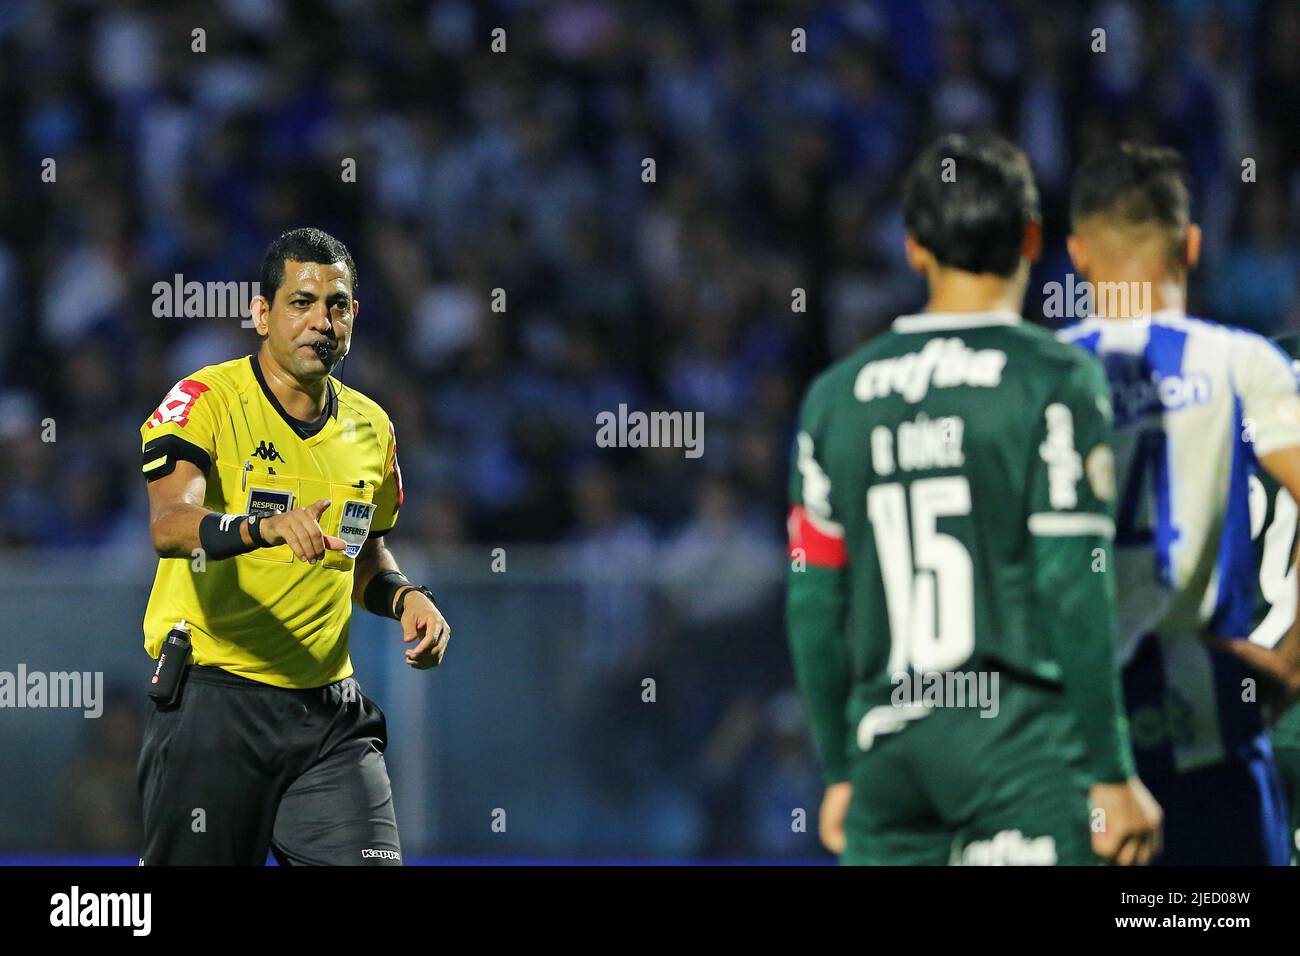 Florianopolis, Brazil. 26th June, 2022. Referee Wagner do Nascimento Magalhaes, during the match between Avai and Palmeiras, for the 14th round of the Campeonato Brasileiro Serie A 2022, at Estadio da Ressacada this Sunday 26. (Heuler Andrey/SPP) Credit: SPP Sport Press Photo. /Alamy Live News Stock Photo